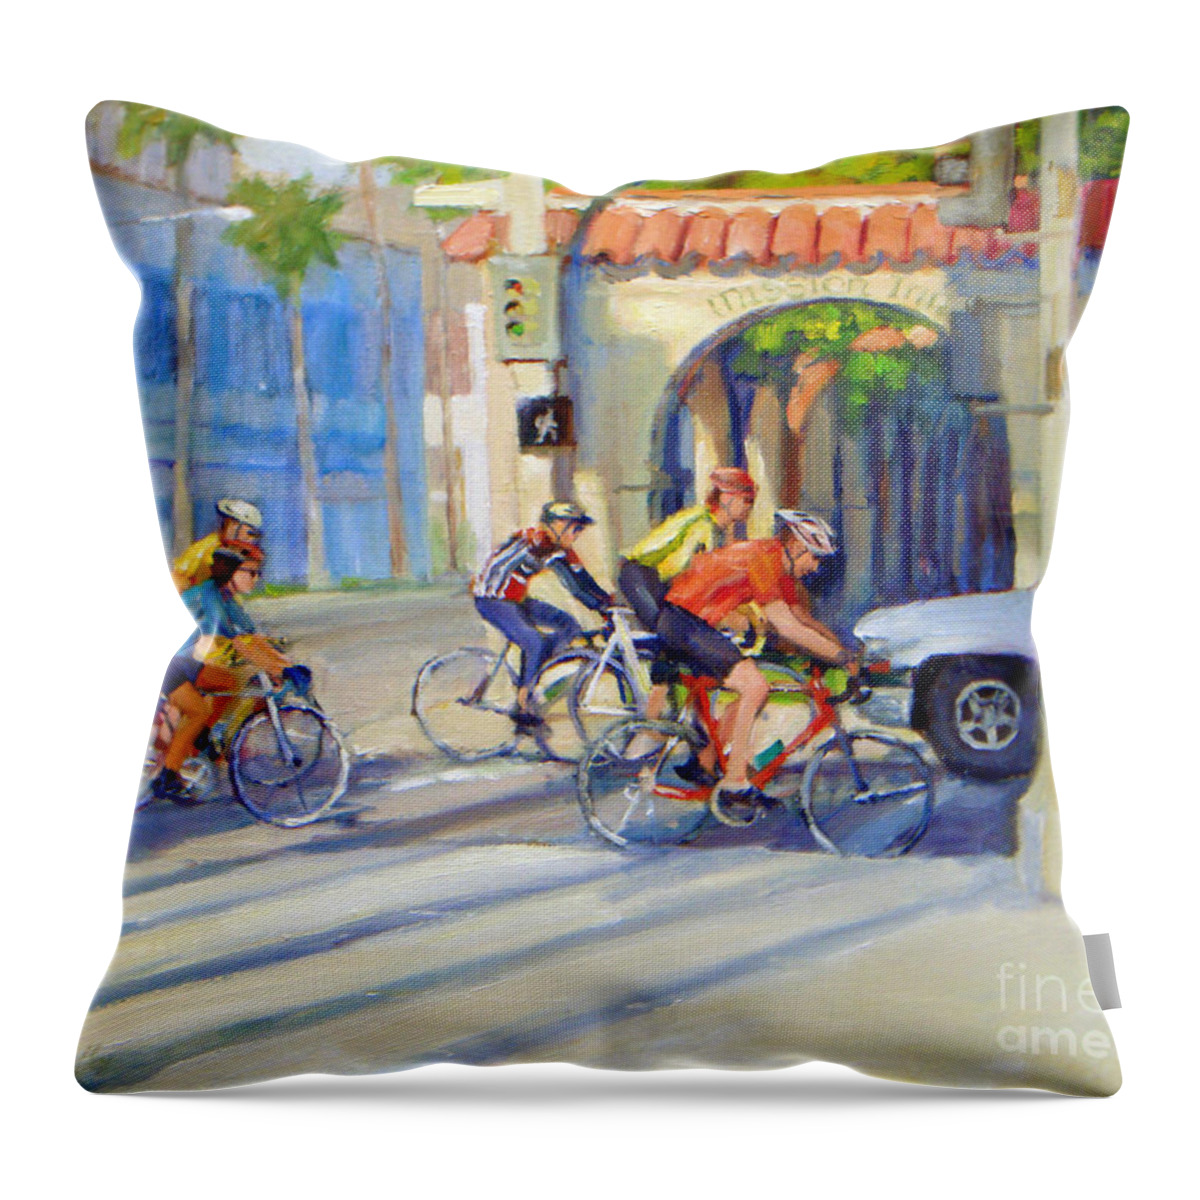 Cityscape Throw Pillow featuring the painting Cycling Past The Archway by Joan Coffey